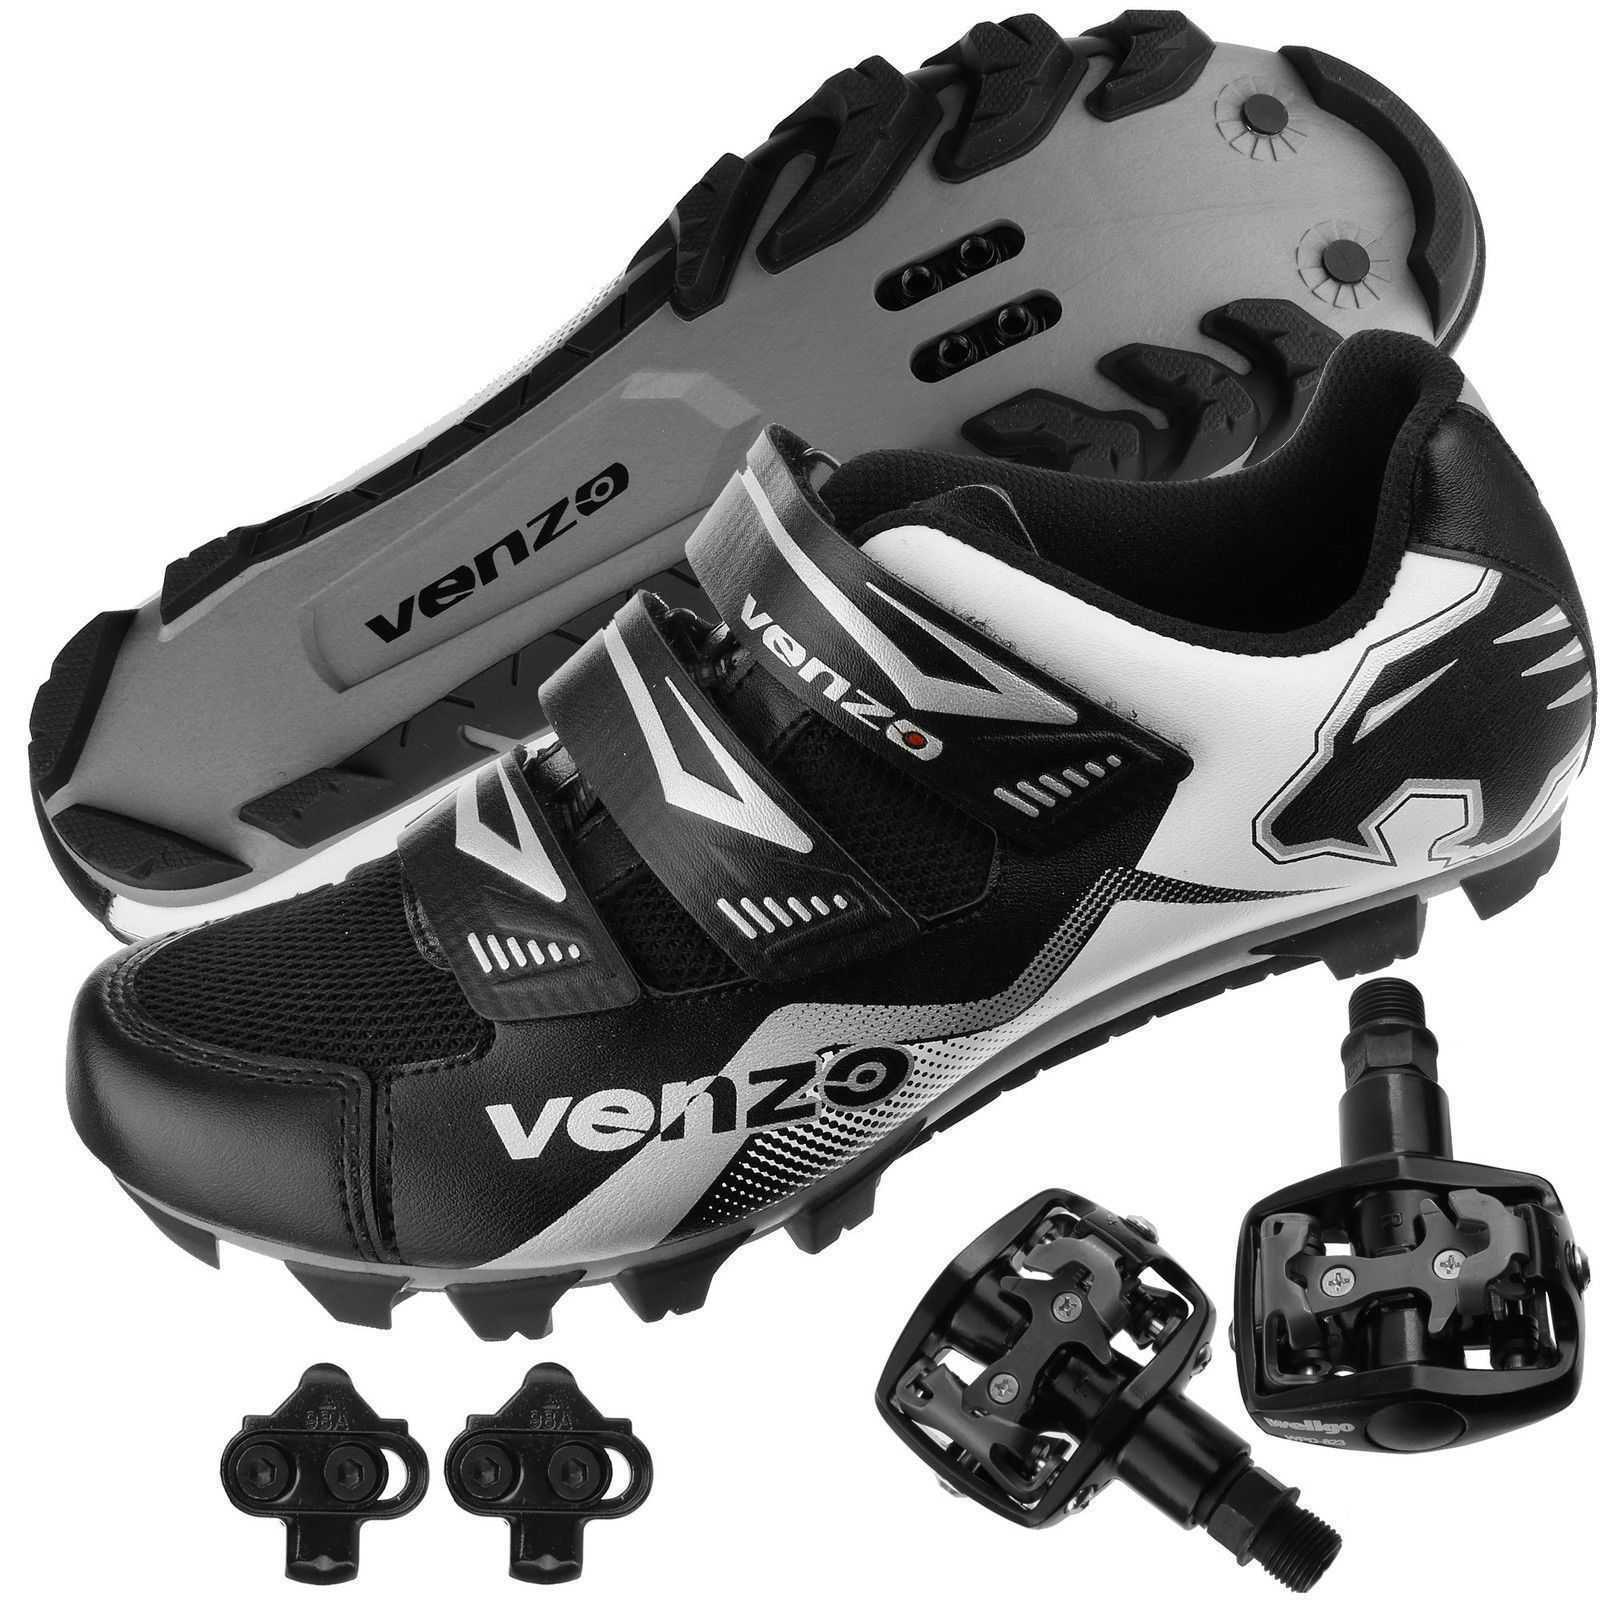 cleats shoes and pedals